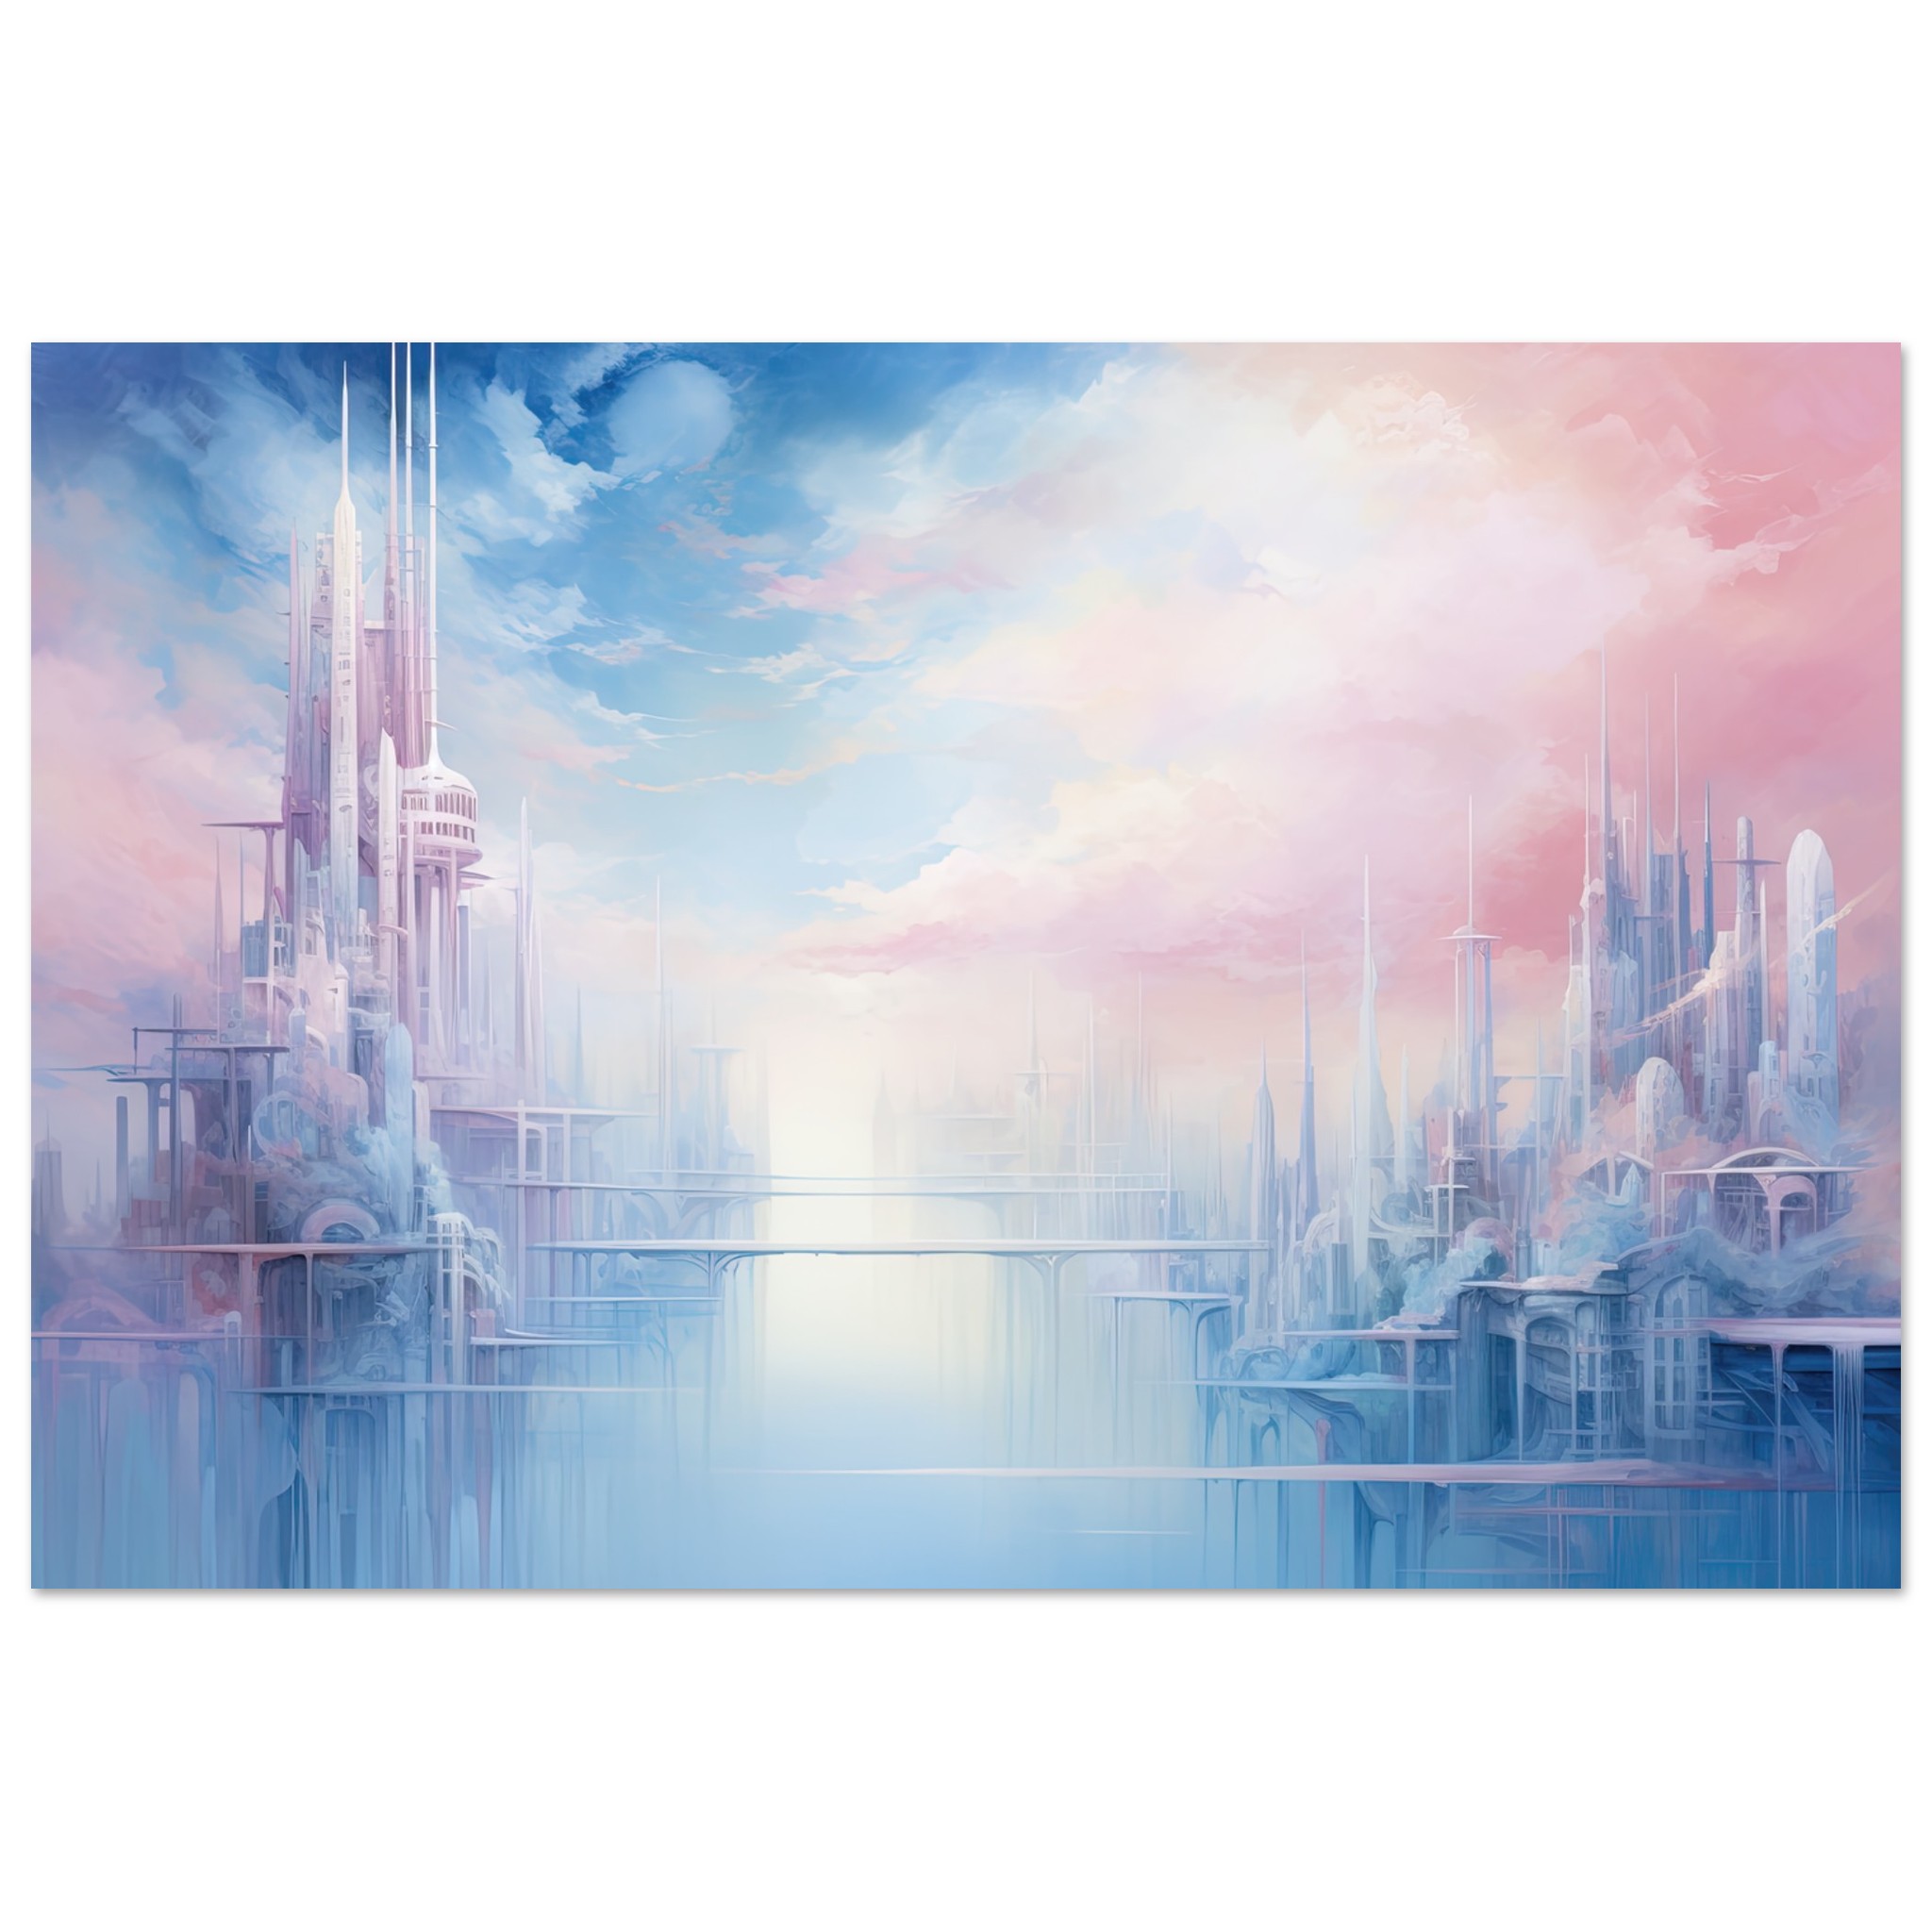 Pastel City in the Clouds Poster - 40x60 cm / 16x24″